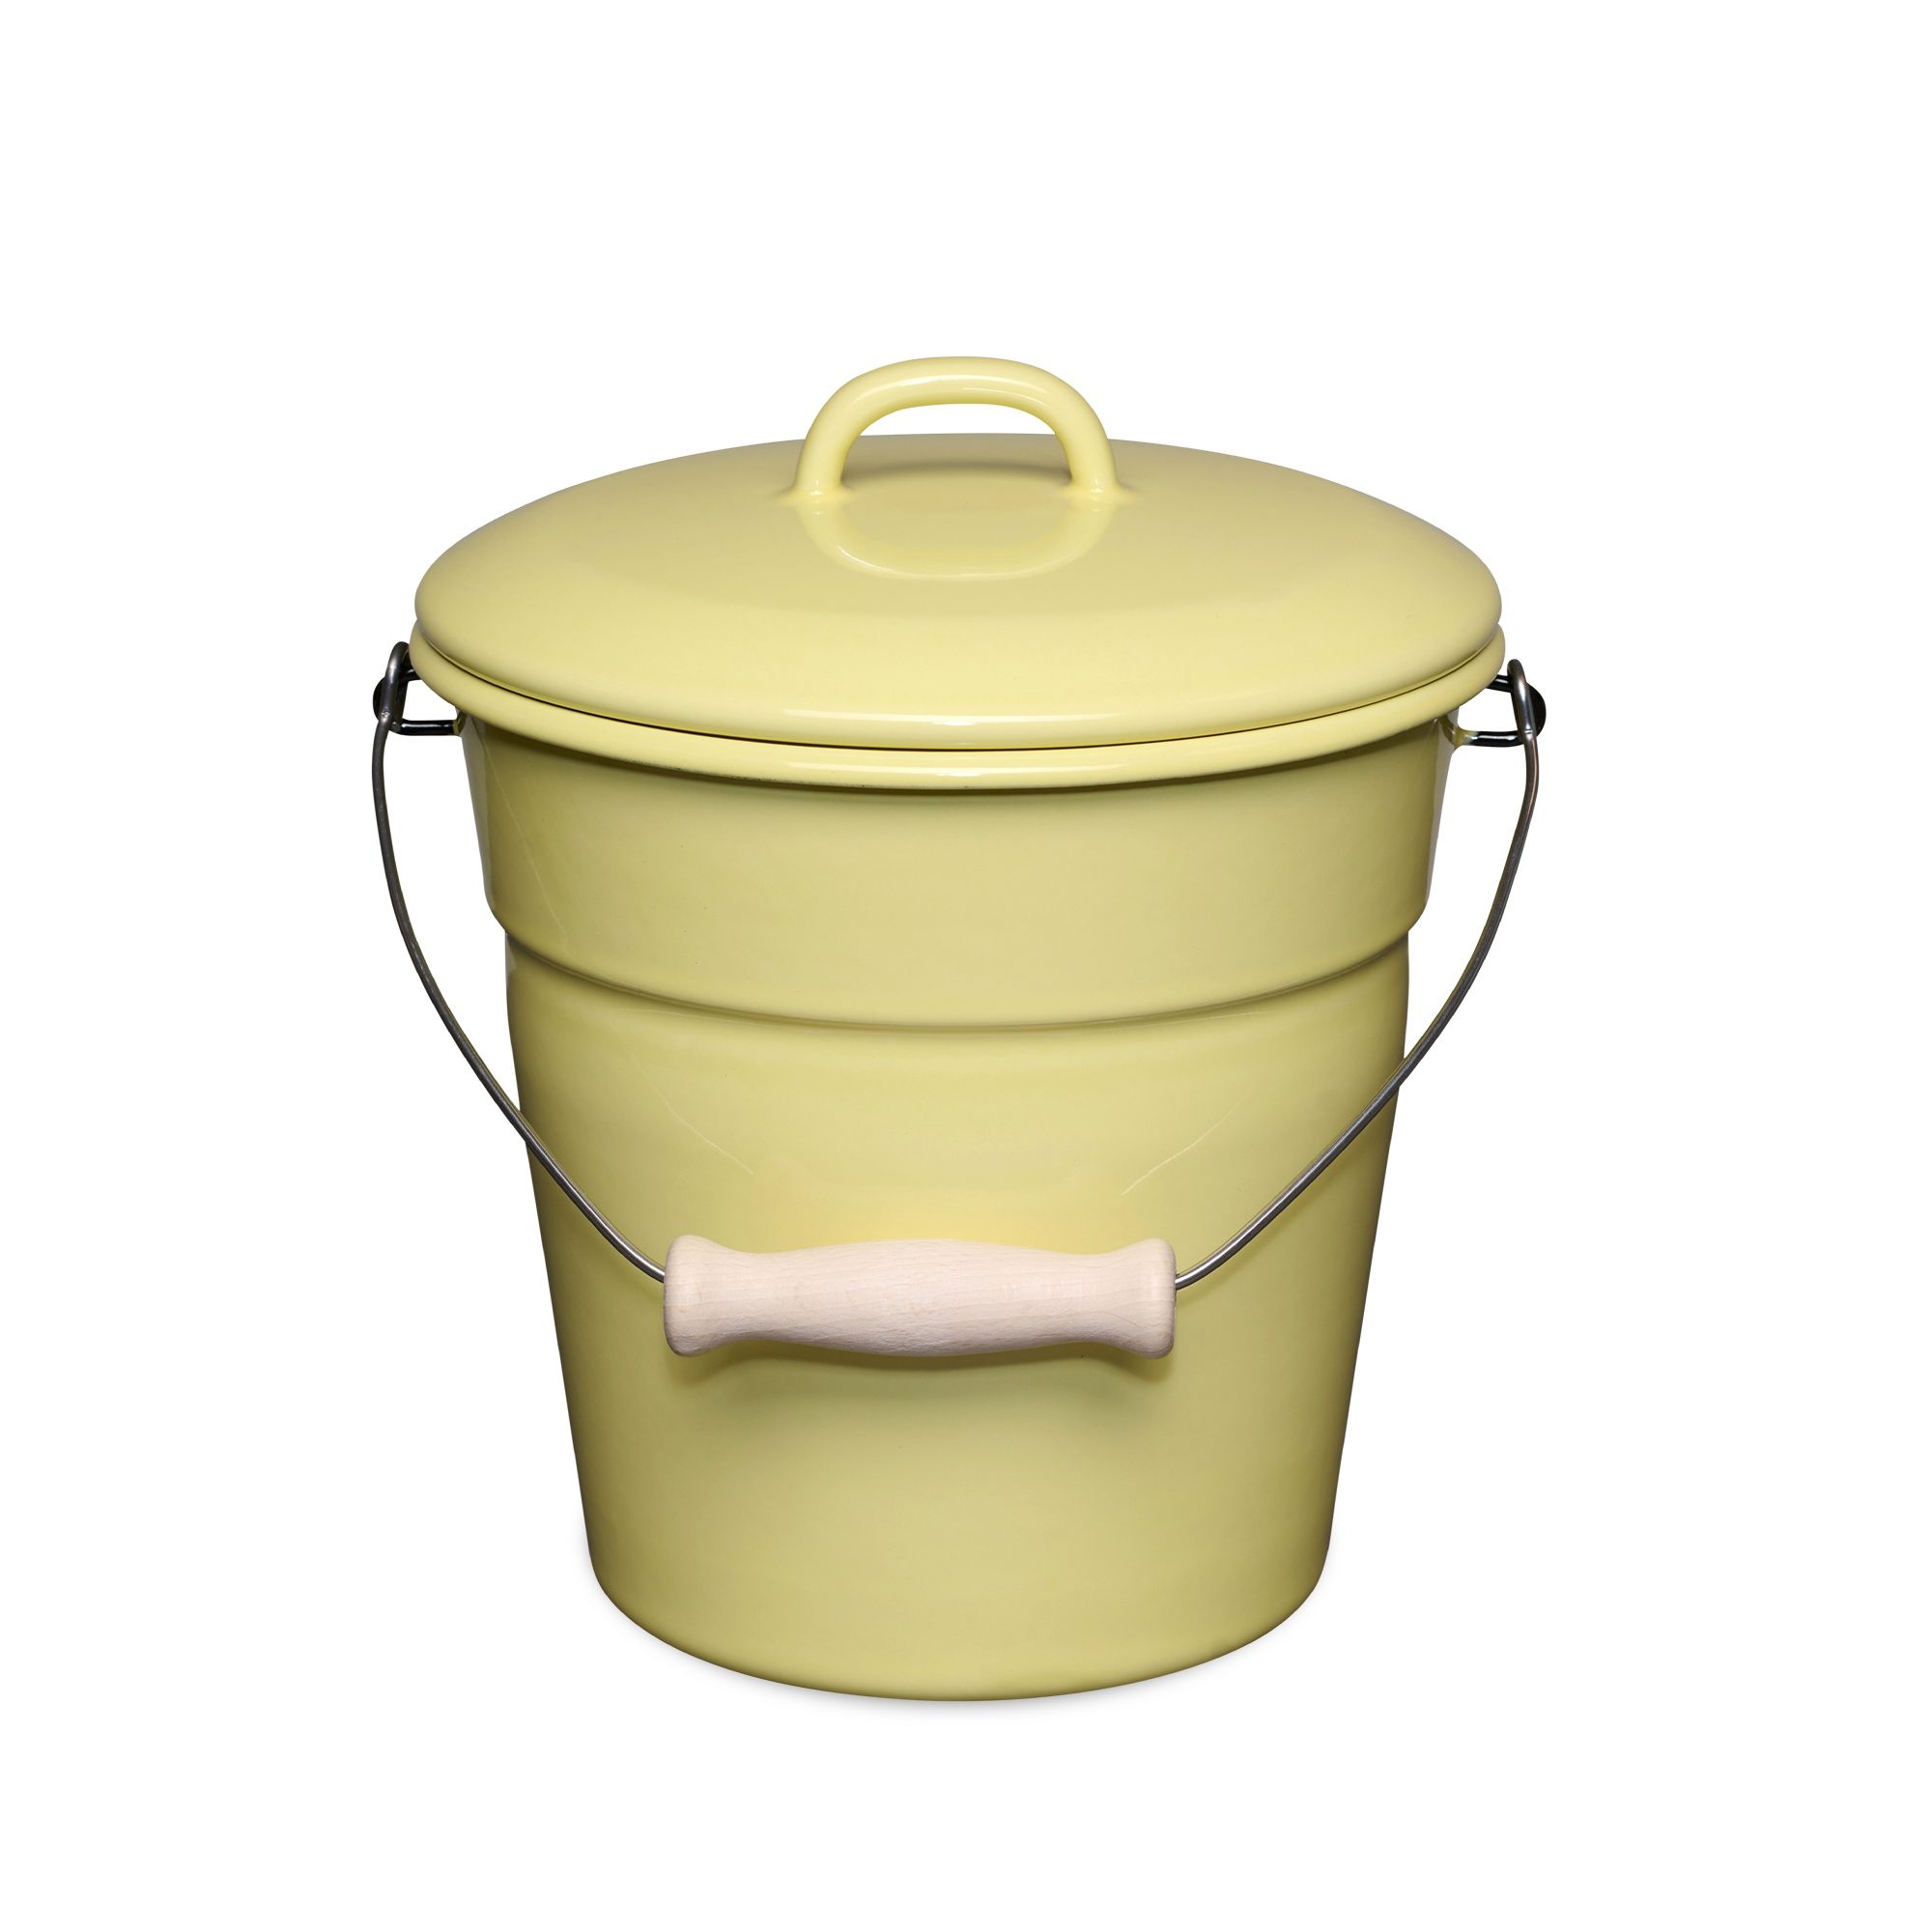 Riess CLASSIC - All-purpose bucket with lid 20 cm Lemon